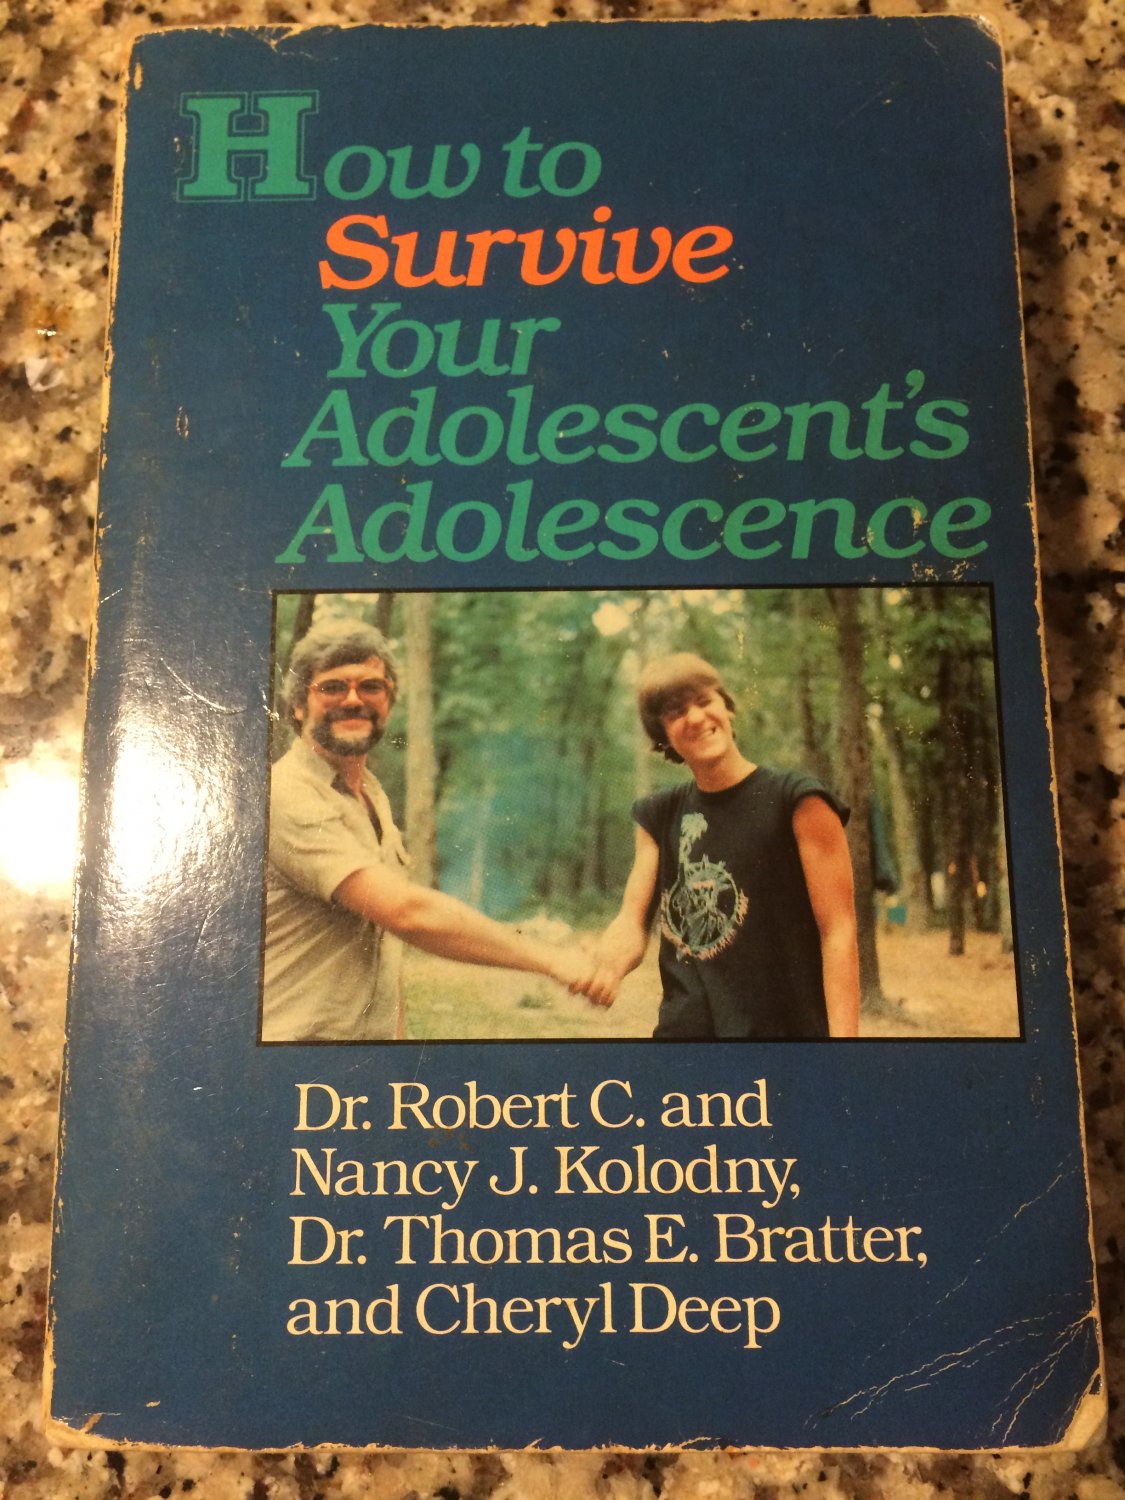 How To Survive Your Adolescents Adolescence [sep 30 1986] Cheryl A